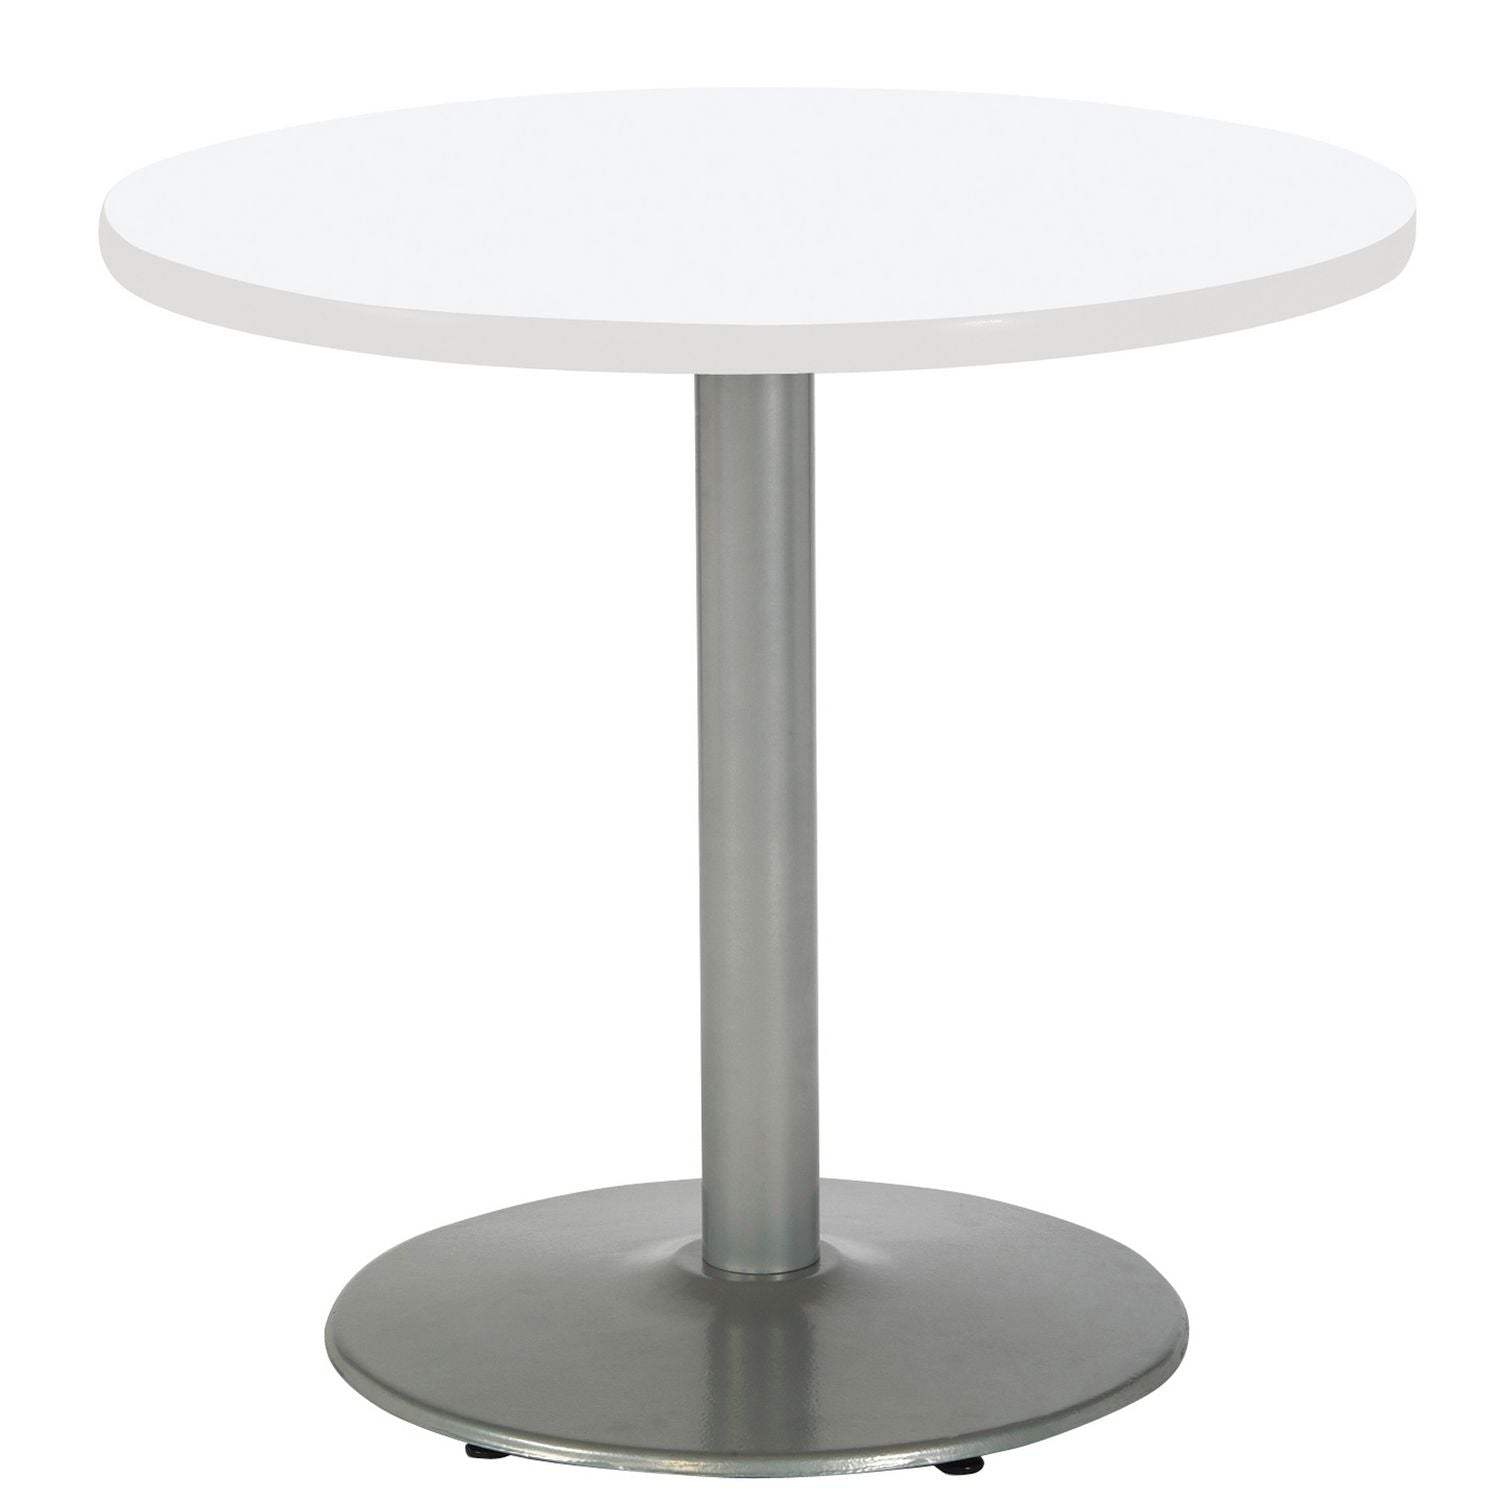 pedestal-table-with-four-light-gray-kool-series-chairs-round-36-dia-x-29h-designer-white-ships-in-4-6-business-days_kfi811774036719 - 2